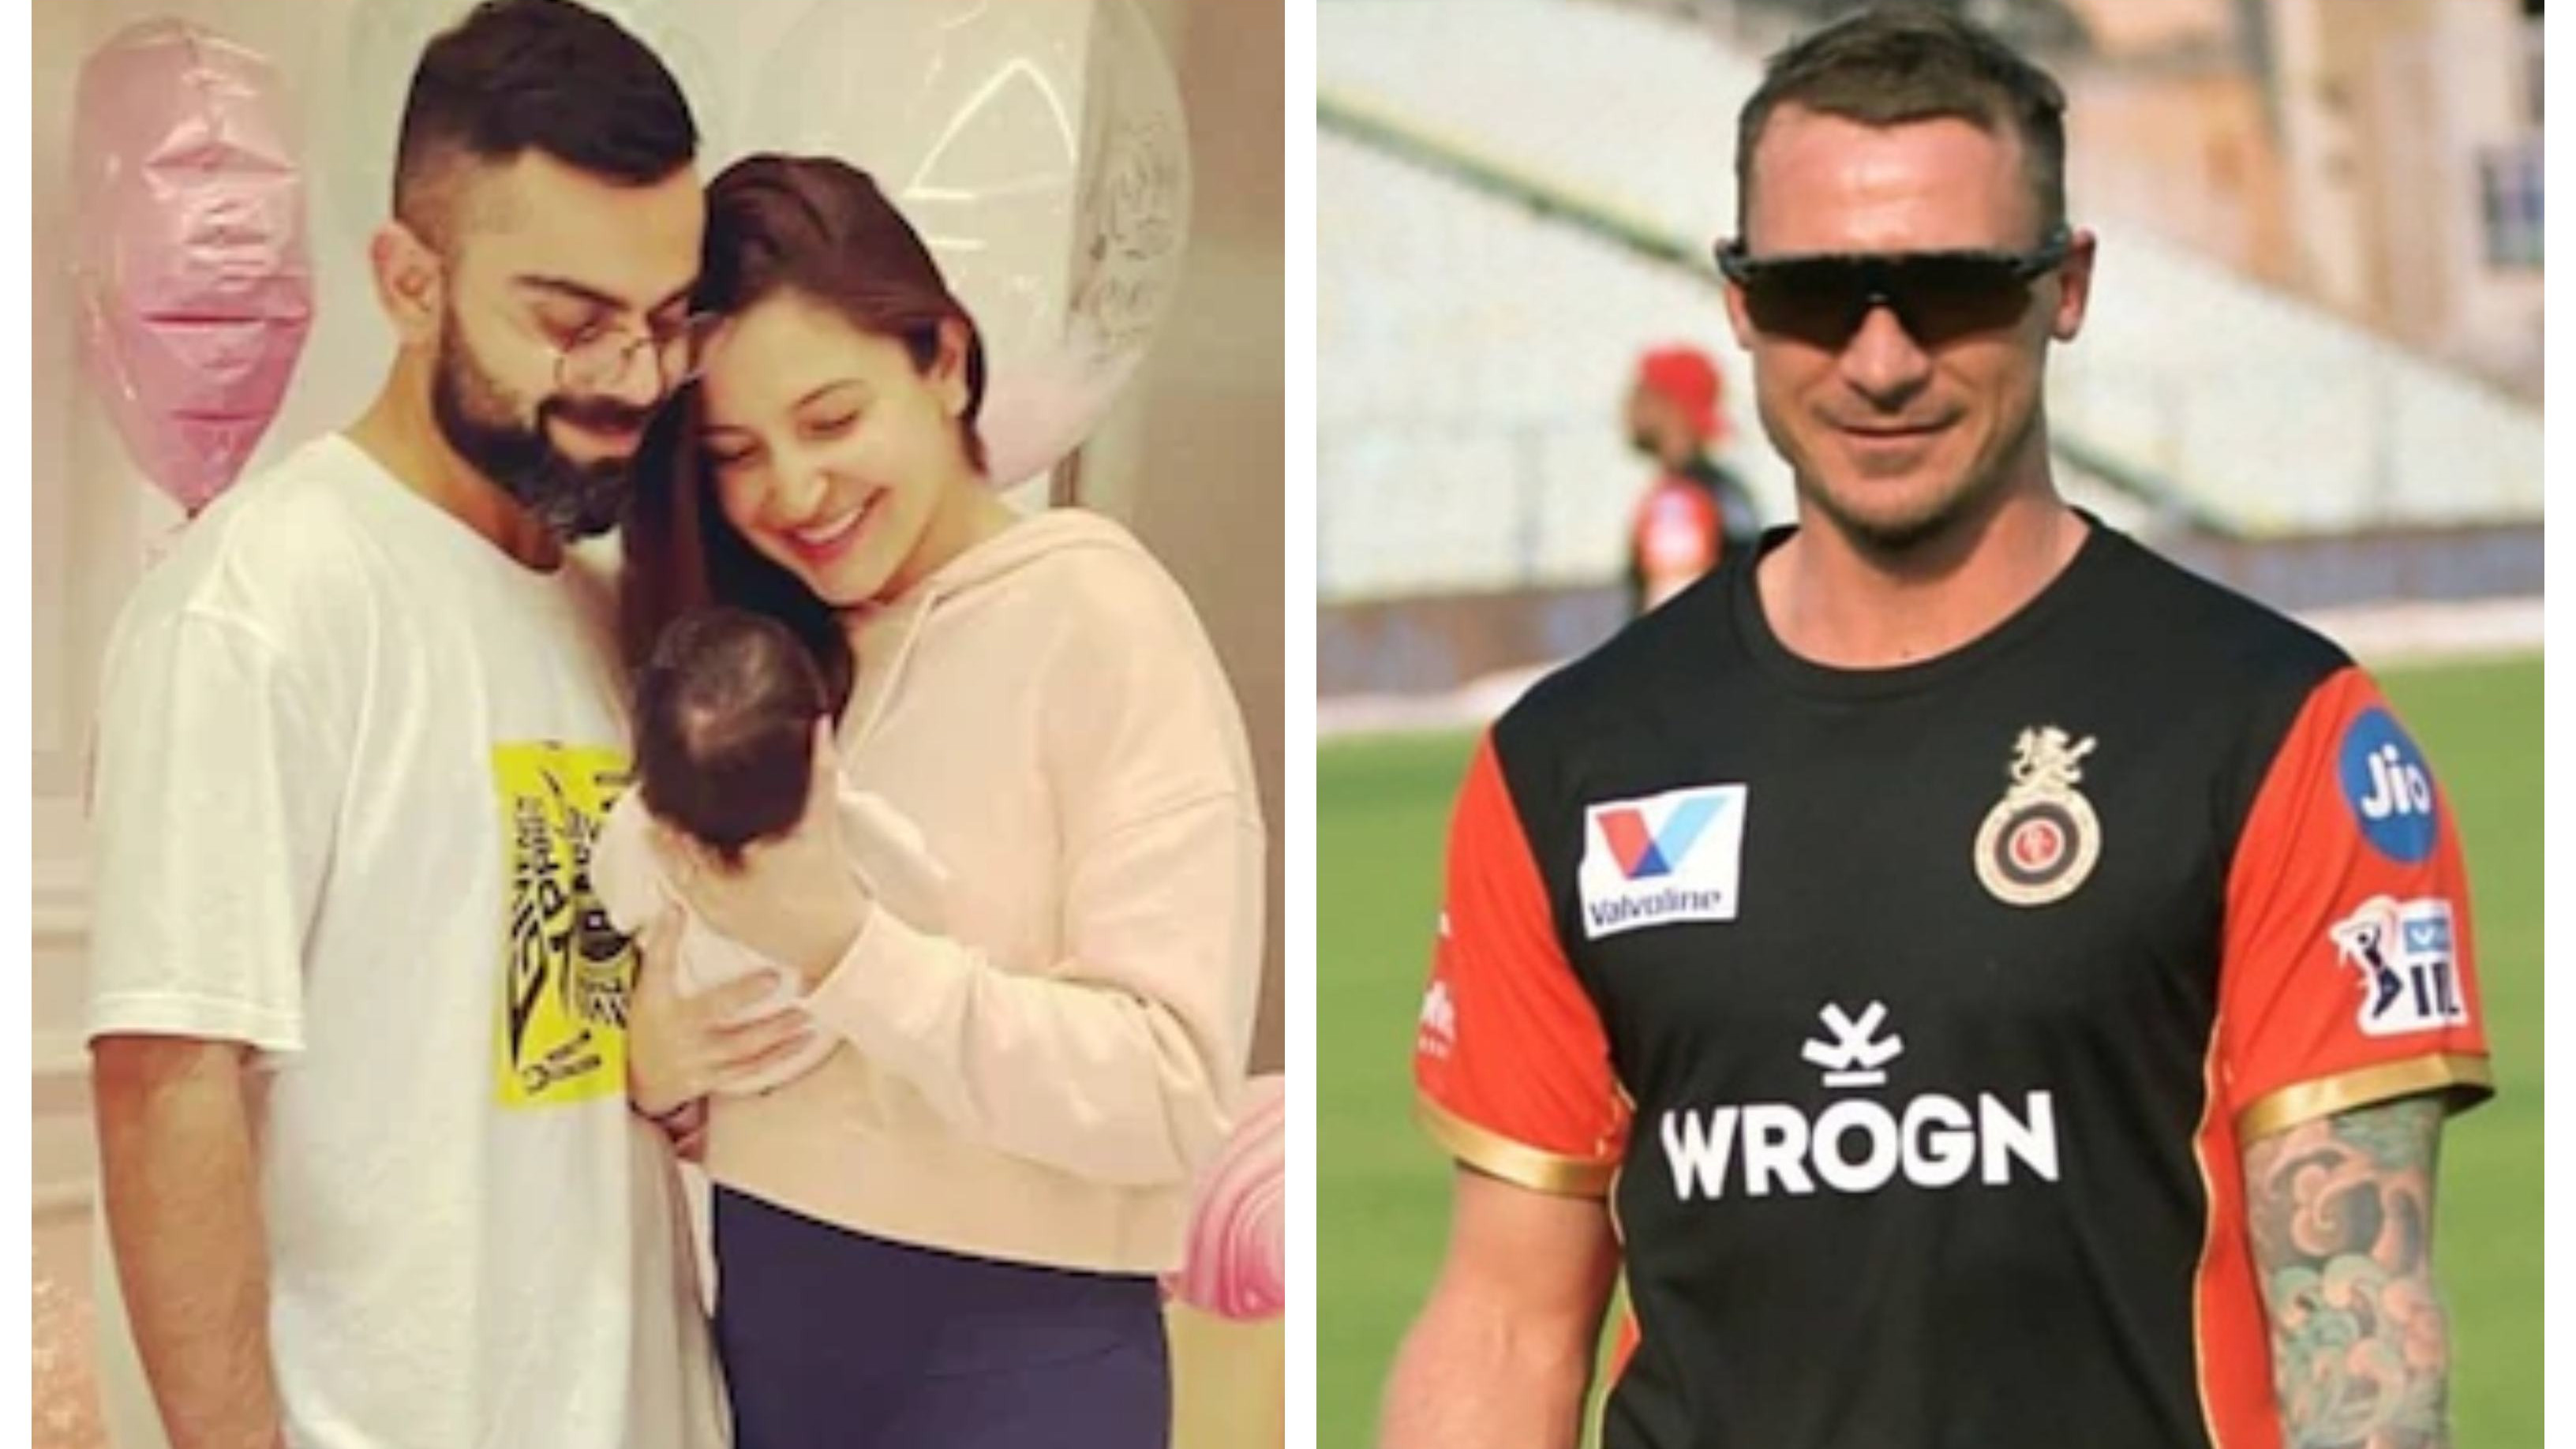 IPL 2021: Virat Kohli's young family may have played big role in him quitting captaincy, reckons Dale Steyn